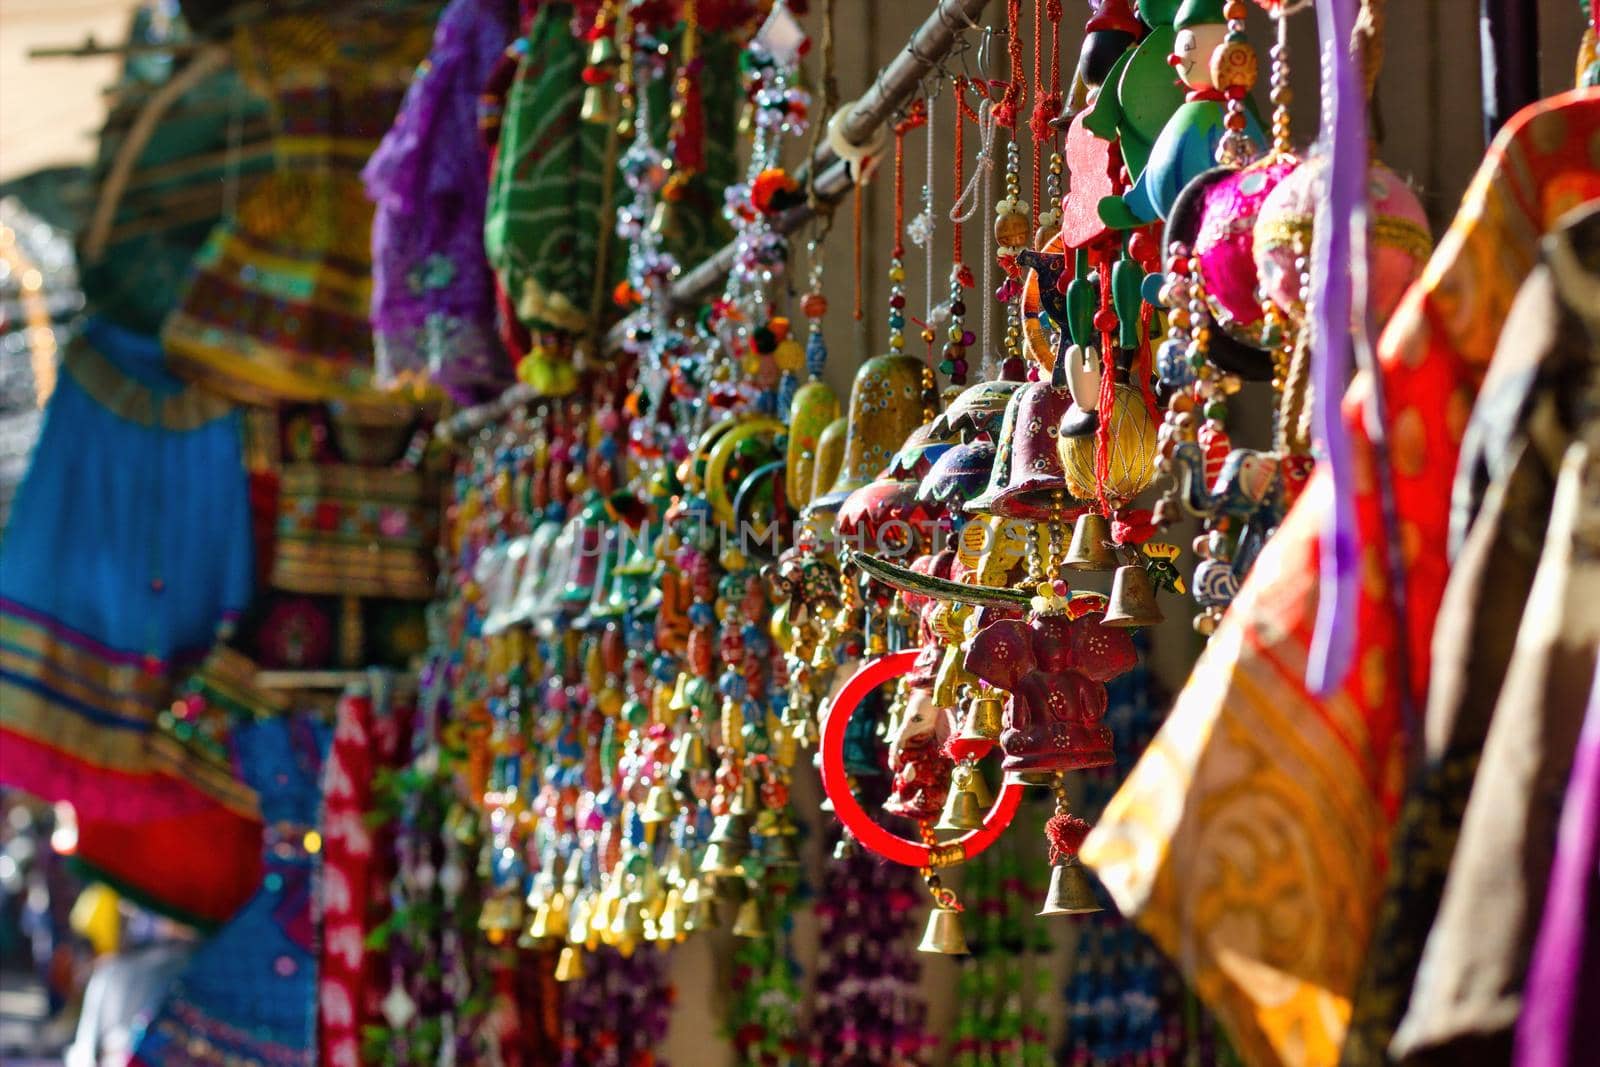 Bunch of colorful decorative item as souvenir being hanging as display for sale in the commercial street of pushkar fair in the state of Rajasthan